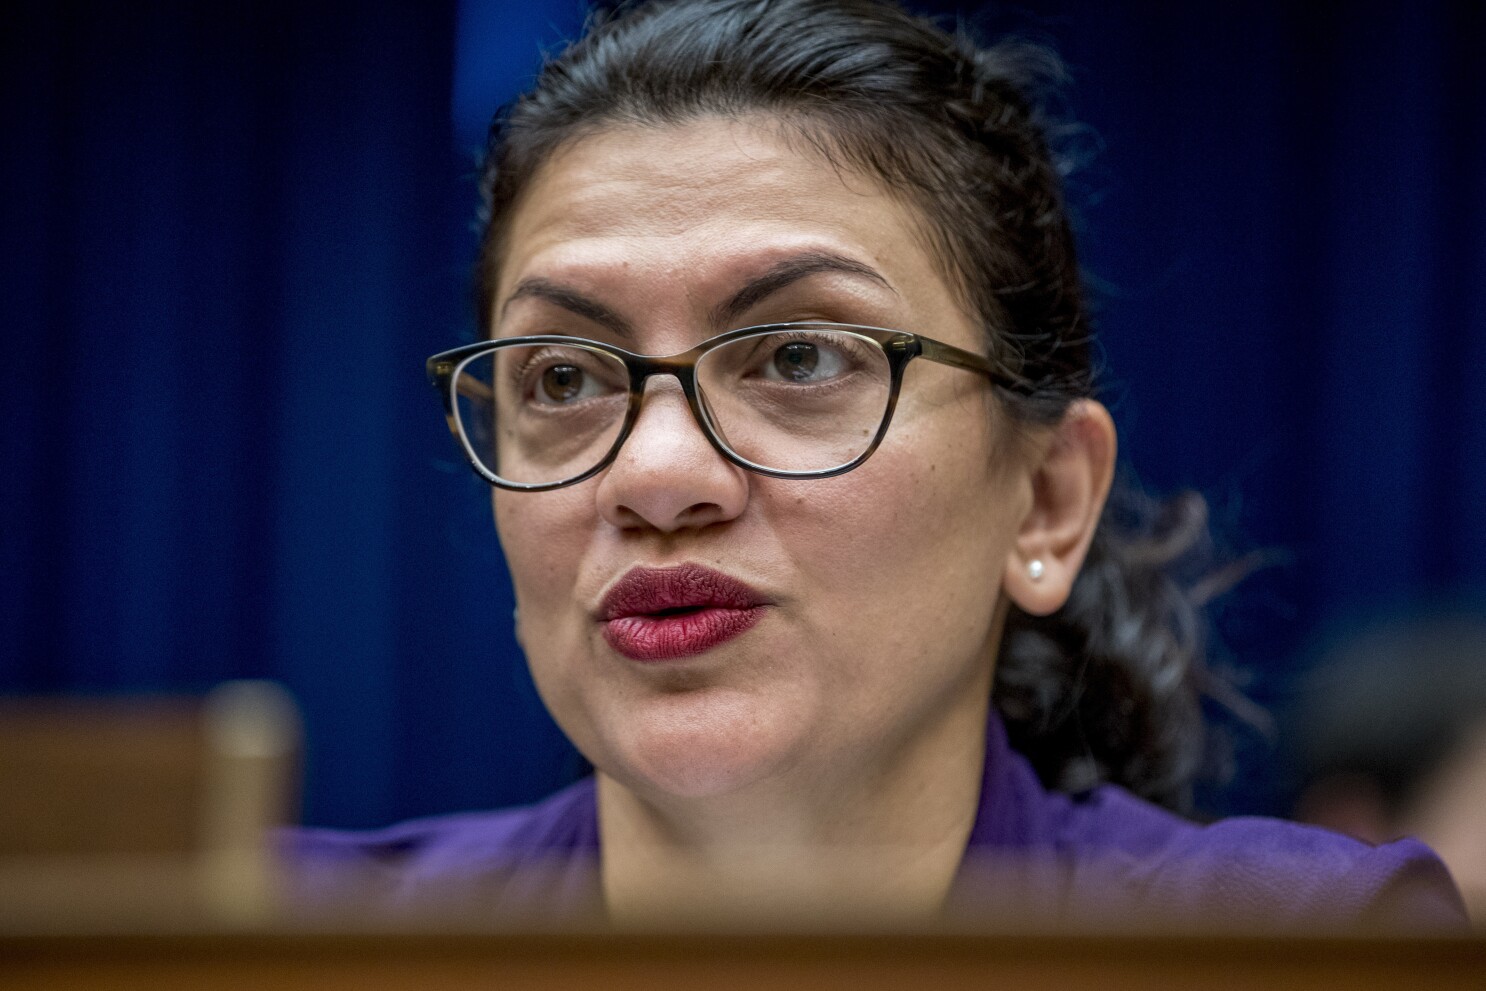 rep rashida tlaib talk canceled after poway school district rescinds theater use the san diego union tribune rep rashida tlaib talk canceled after